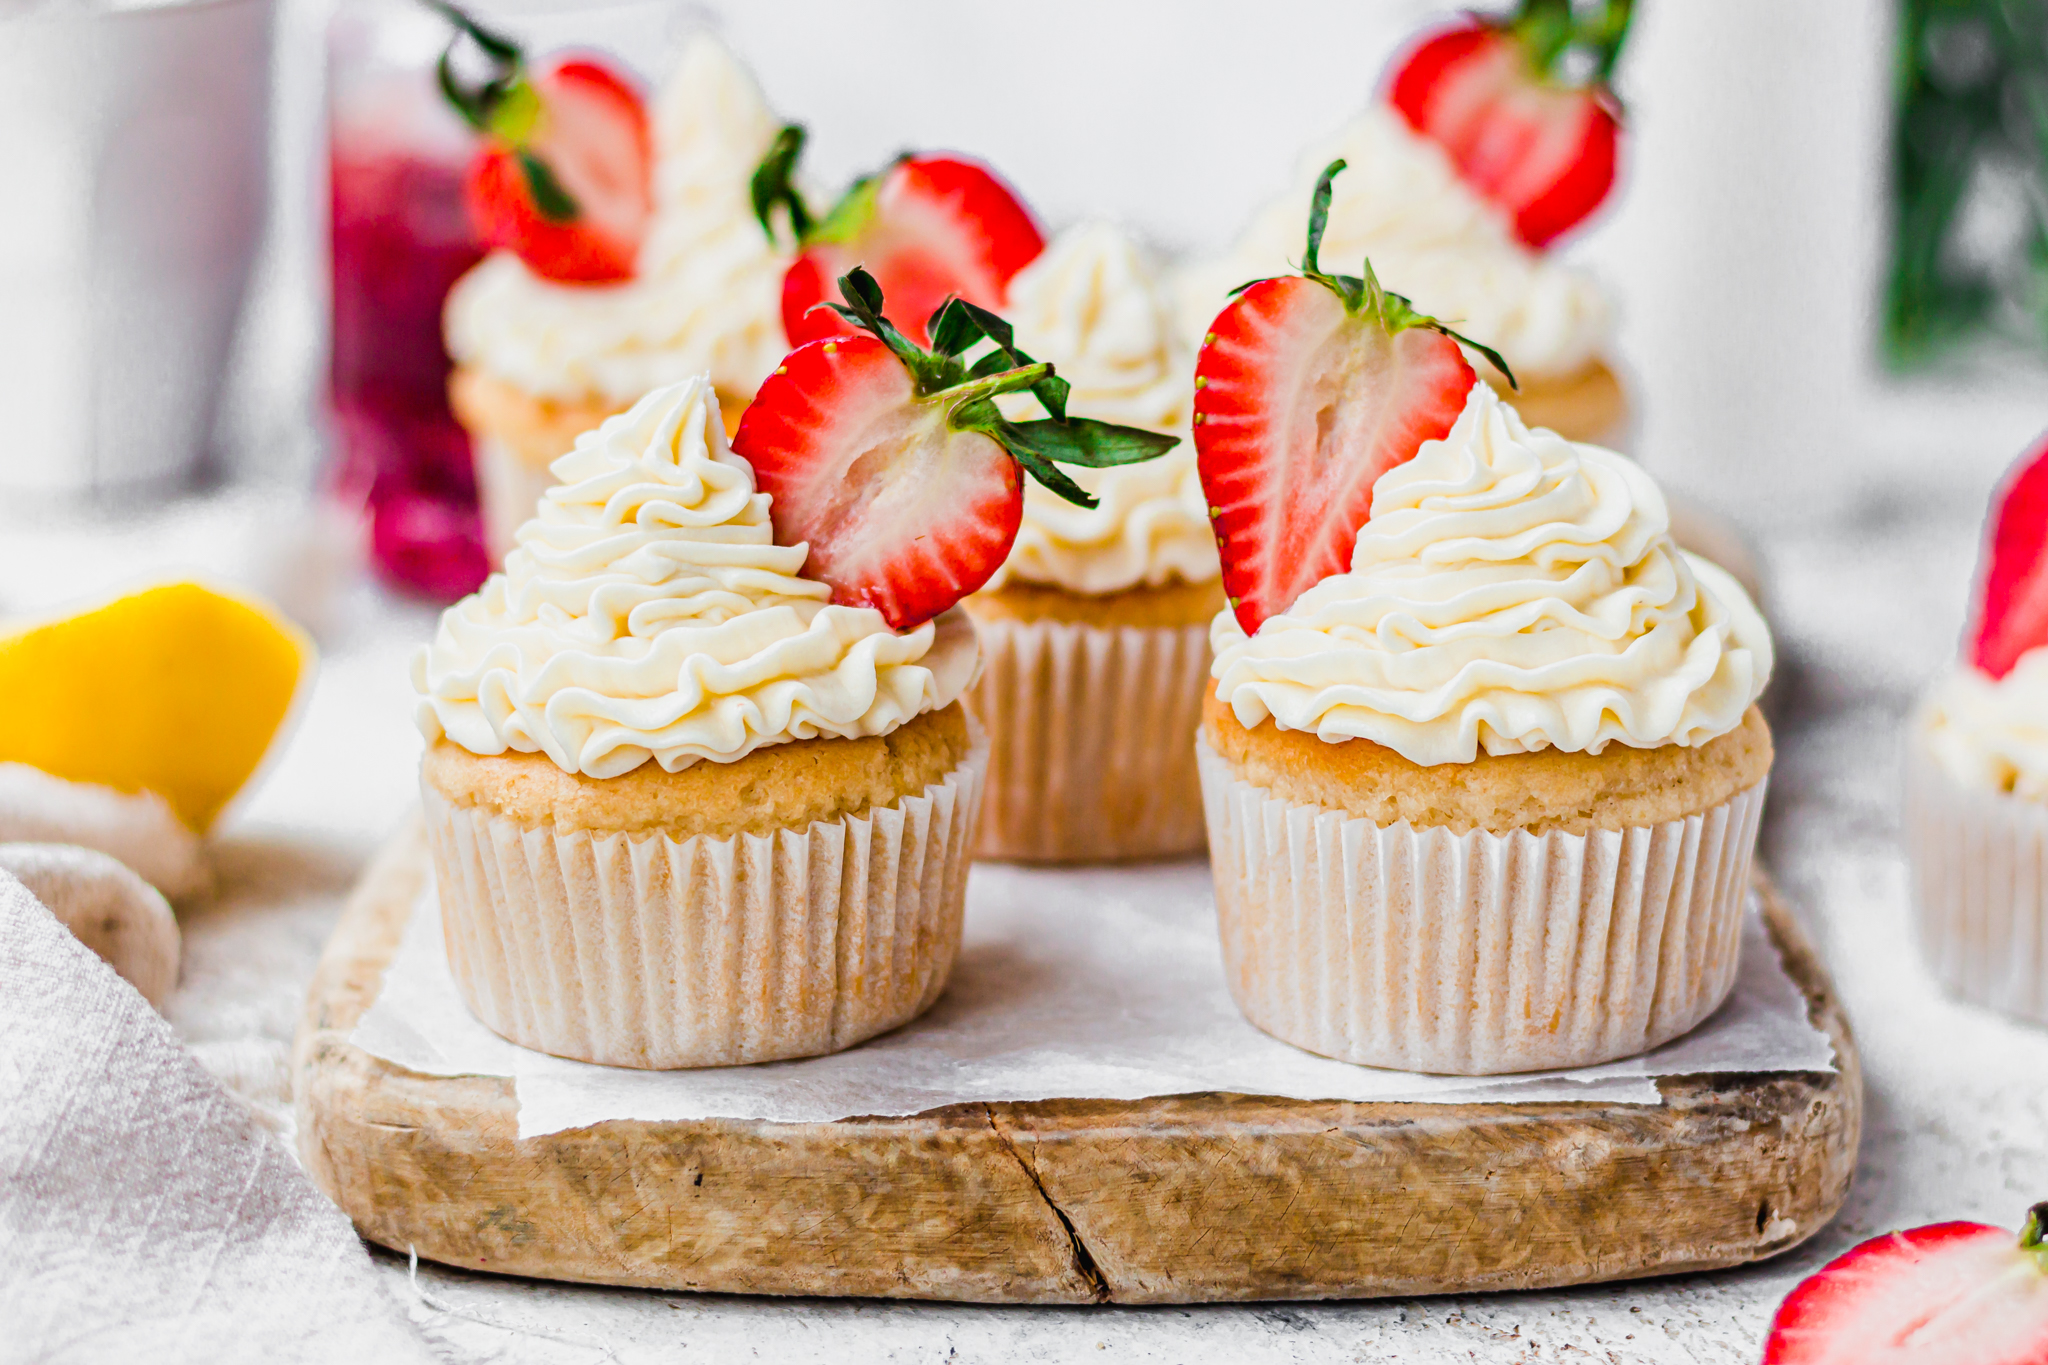 Two Vegan Lemon Strawberry Cupcakes on a wooden board